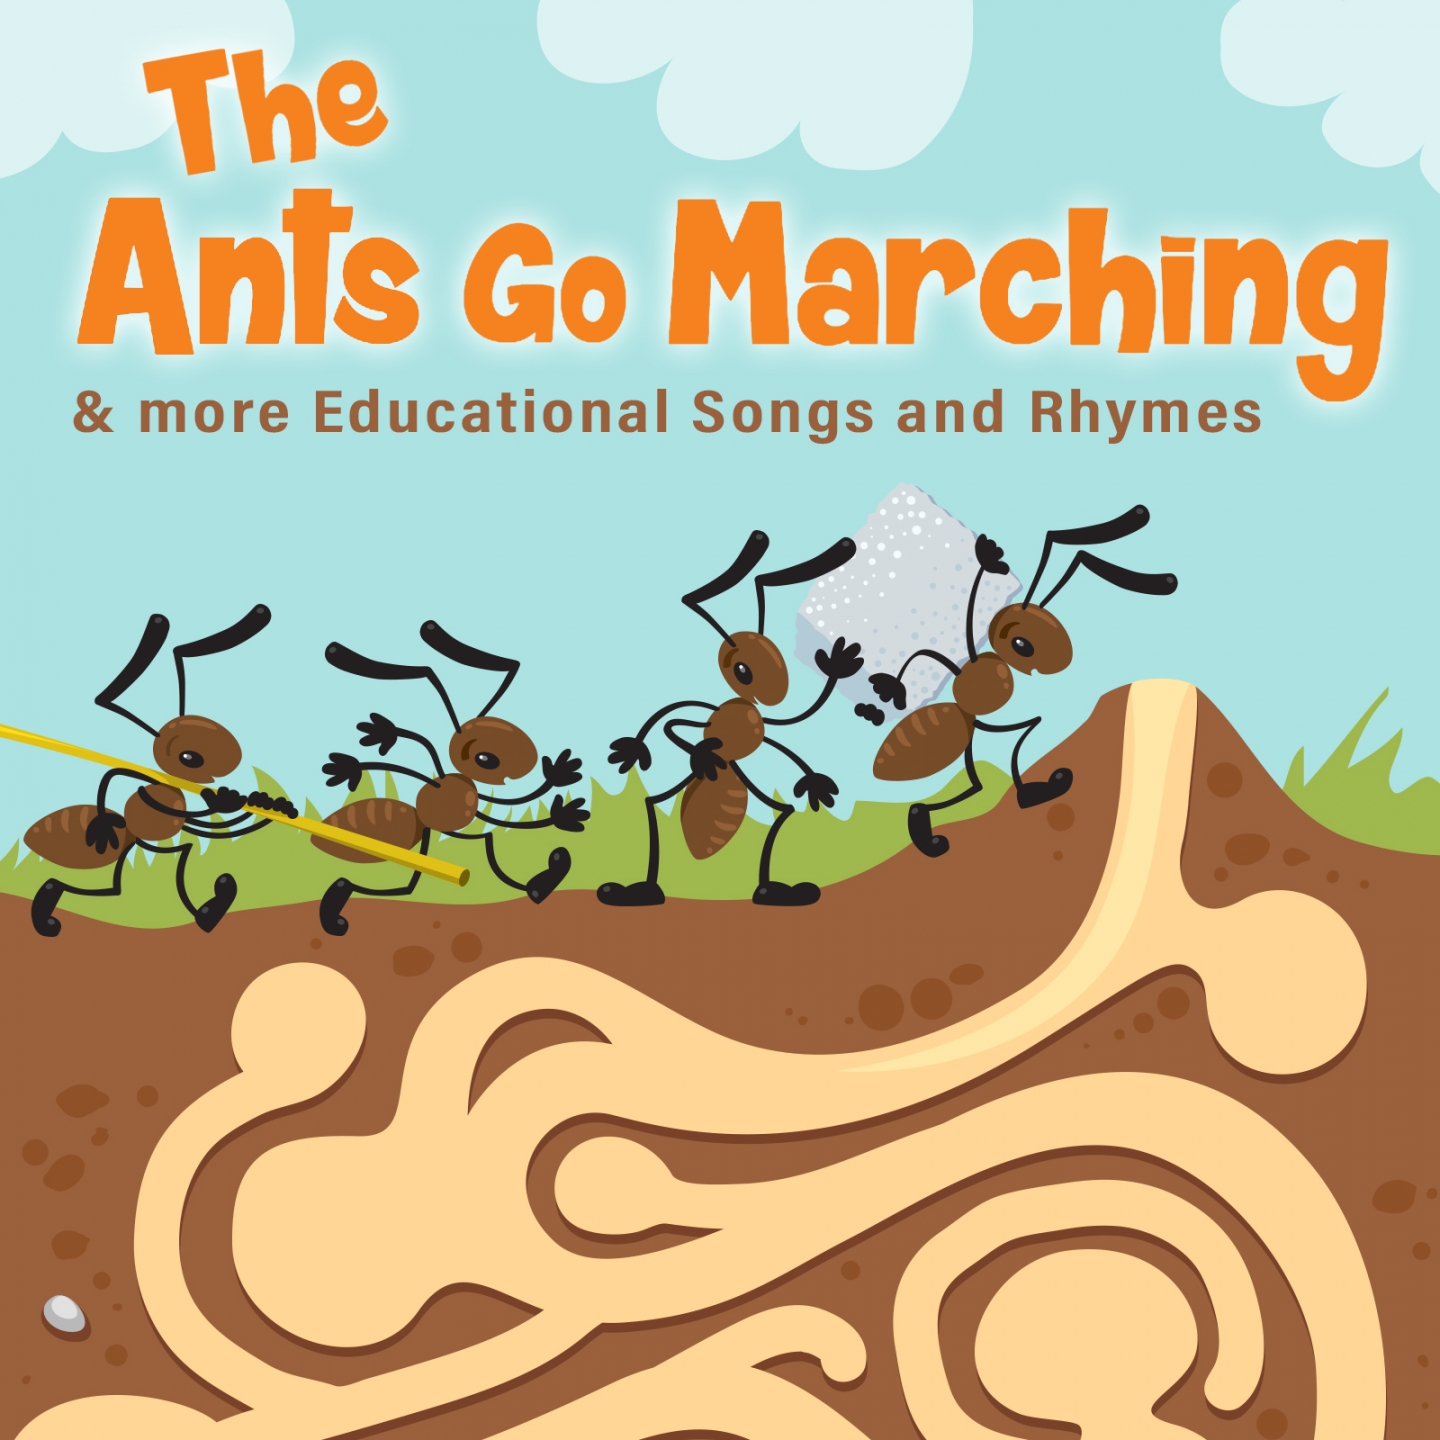 The Ants Go Marching & More Educational Songs and Rhymes